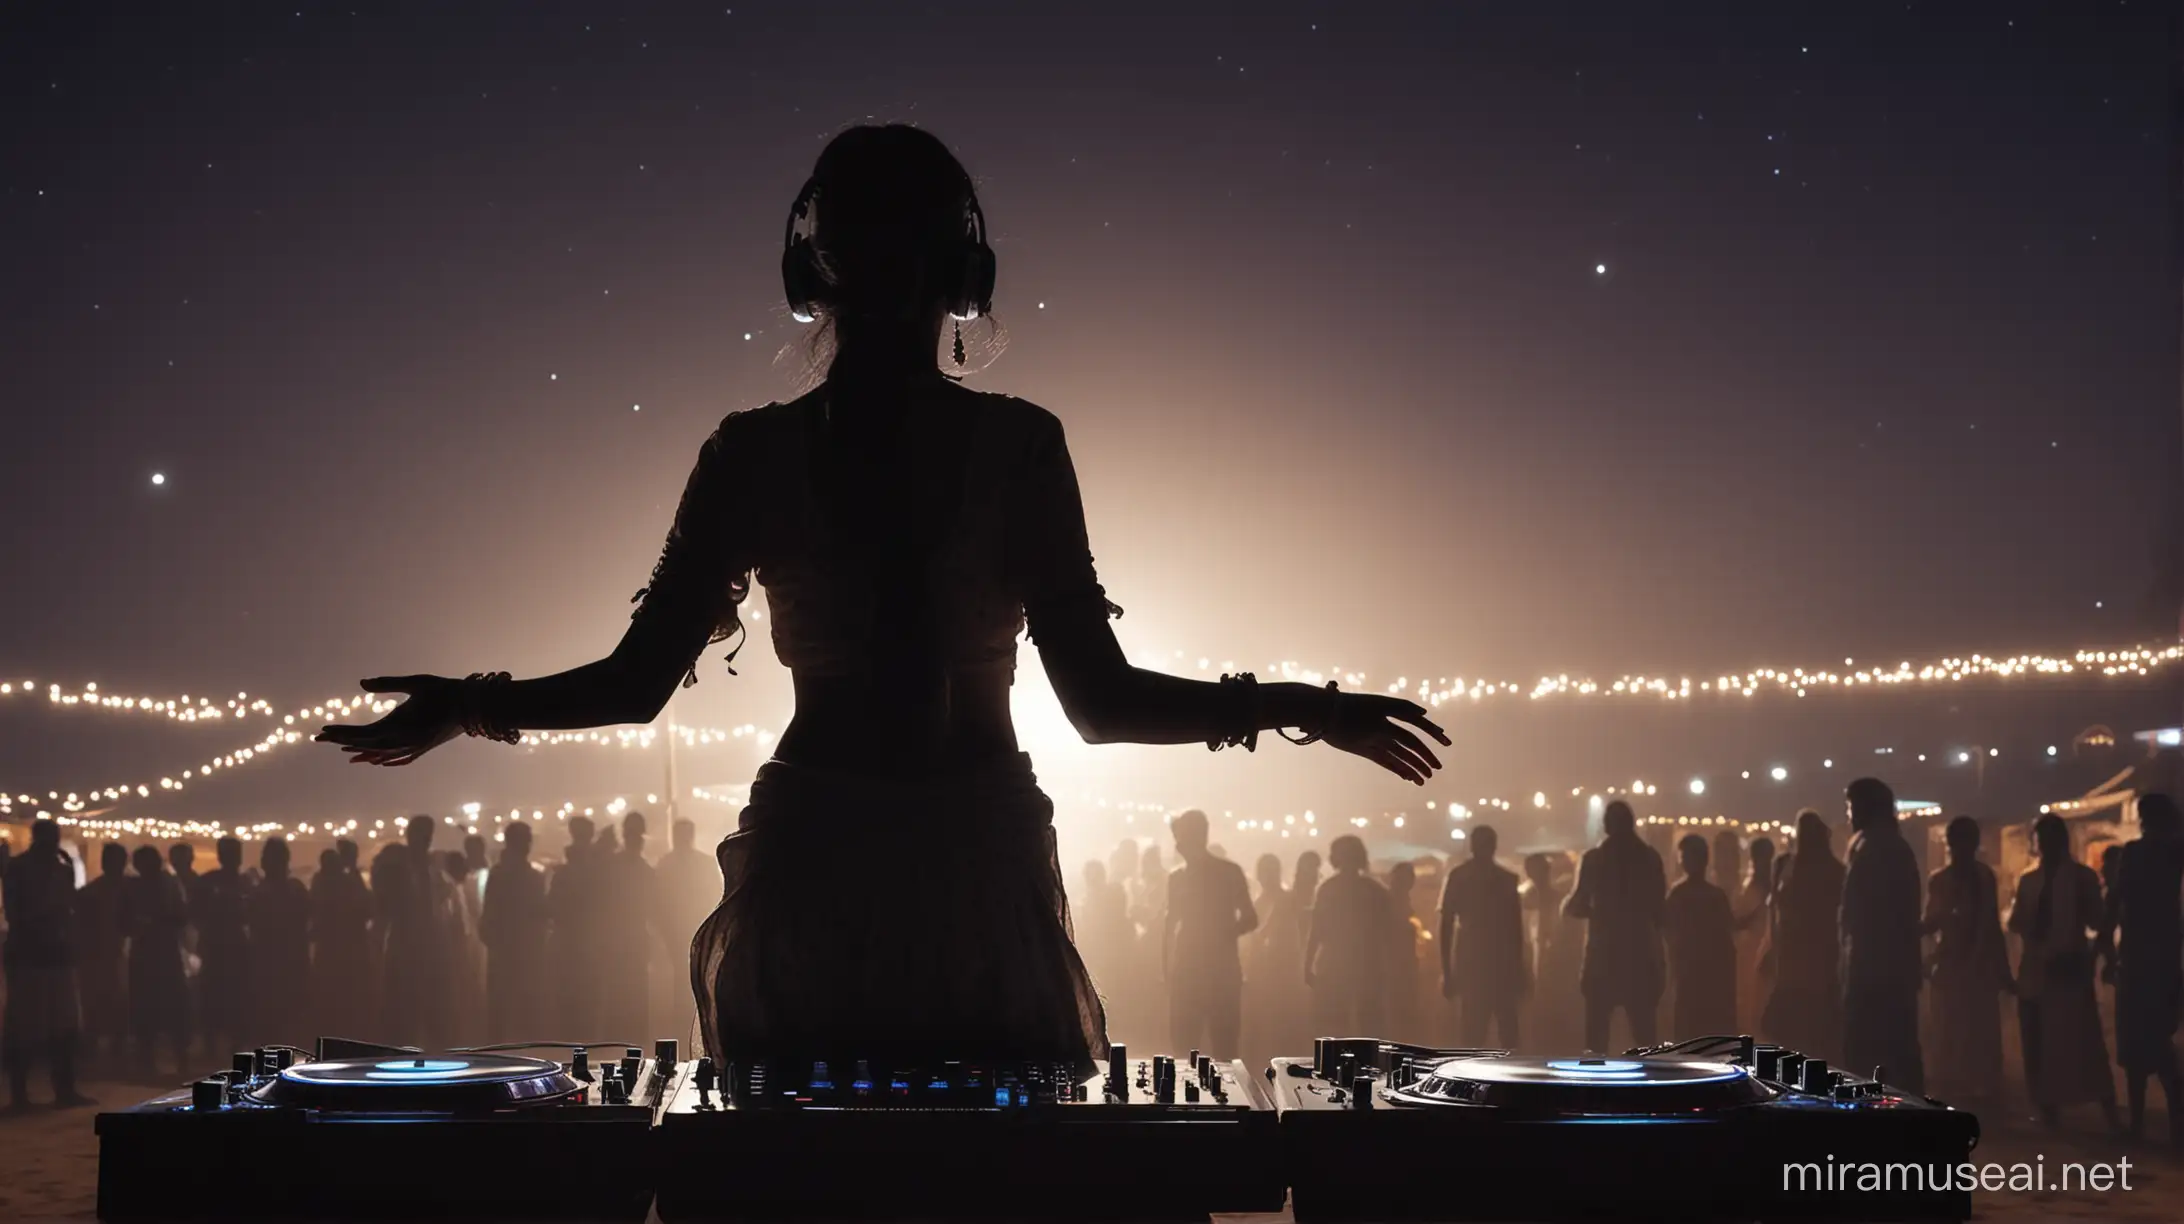 Silhouette of Indian Village Girl Dancing on DJ with HyperDetailed Night View